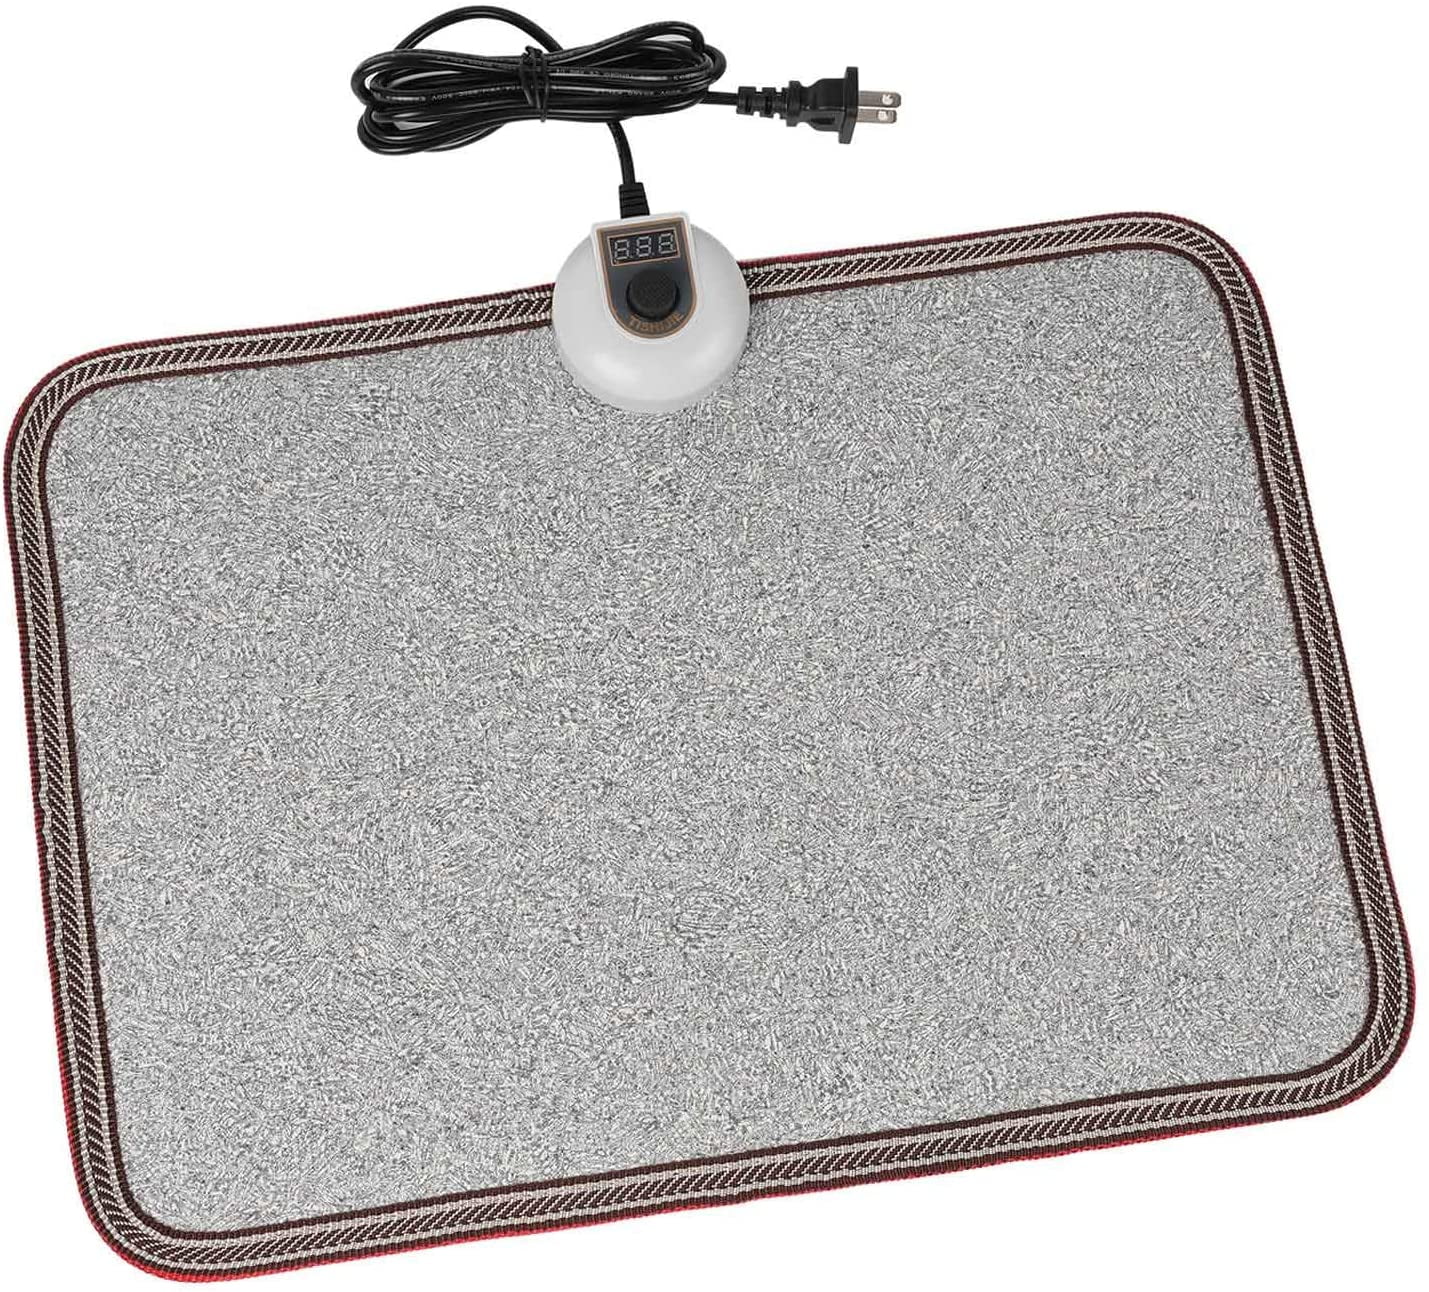 Heated Floor Mat - Foot Warmer Under Desk, 11.8x19.7in Heated Feet Rest for  Home Office Desk, Winter 110V Electric Heating Pad with 3 Timers & 10  Adjustable Temperature